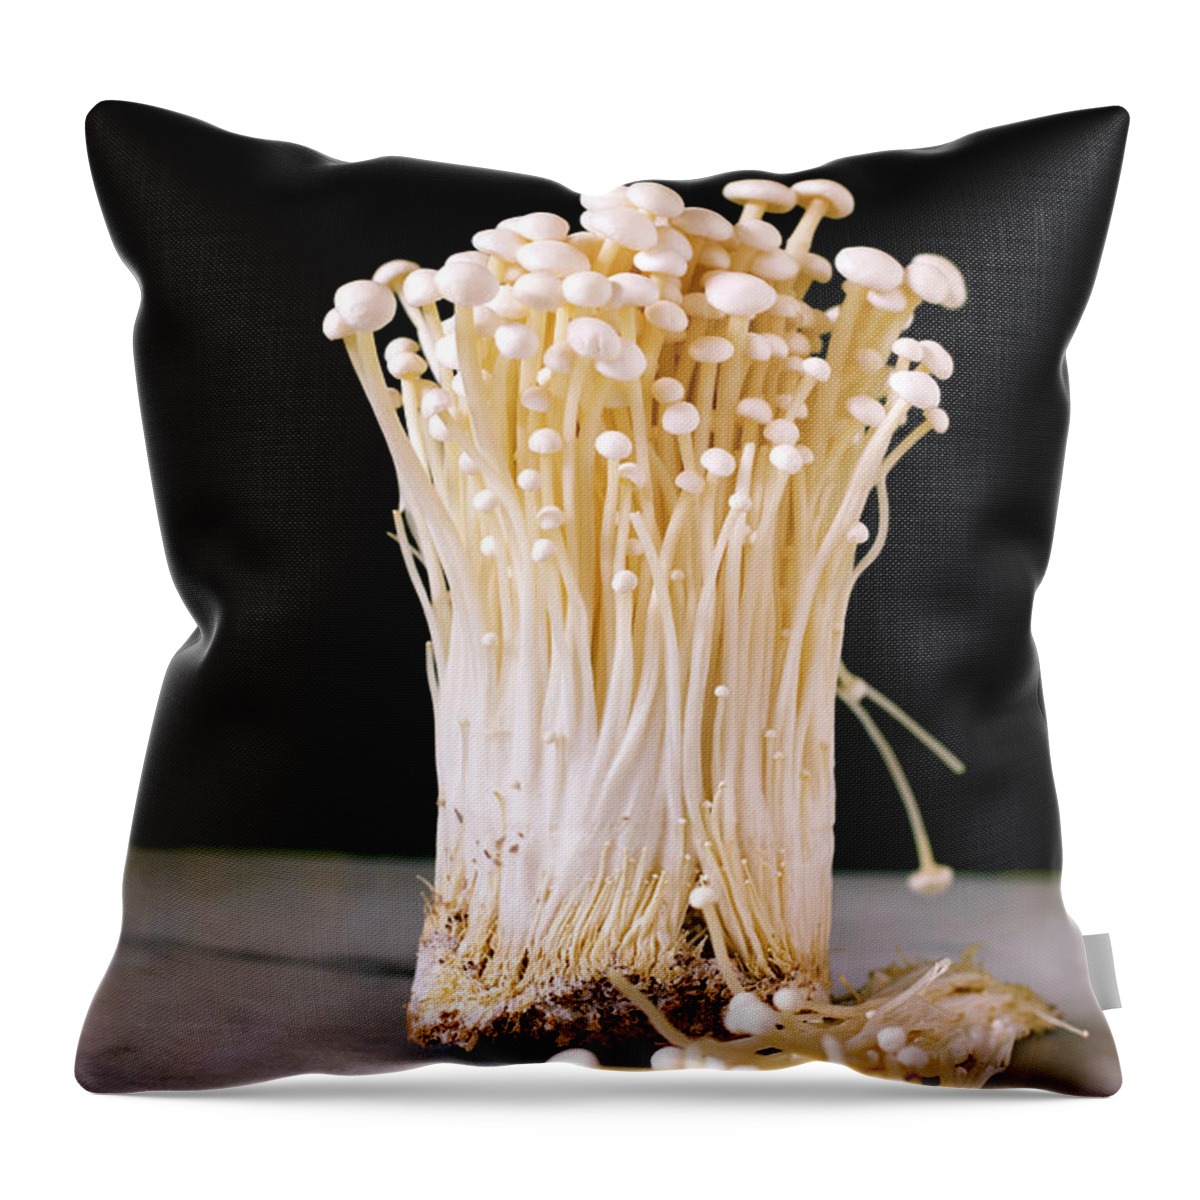 Expertise Throw Pillow featuring the photograph Enokitake, Flammulina Velutipes by Angelika Antl